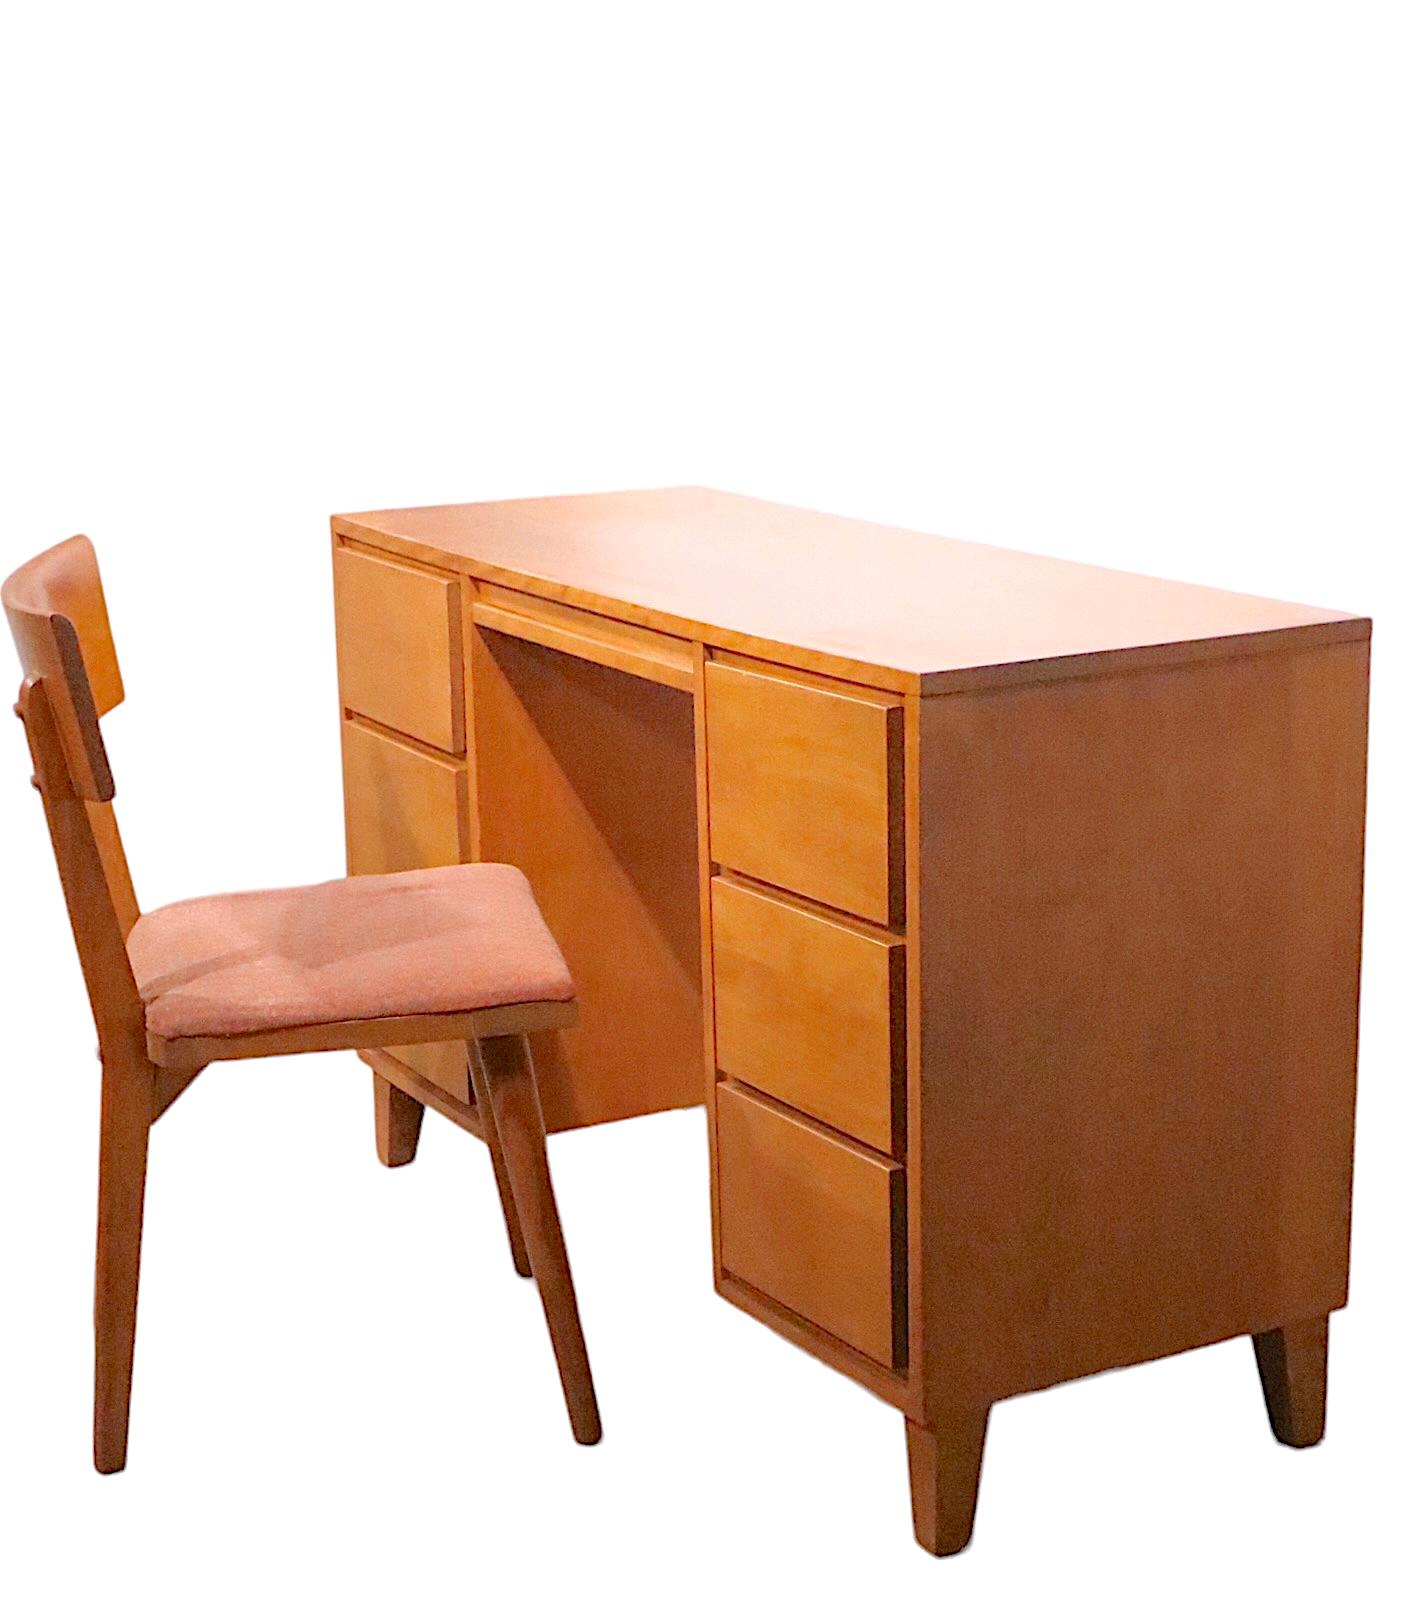 1950's Mid Century Desk and Chair Conant Ball  Modern Mates by Leslie Diamond   For Sale 4